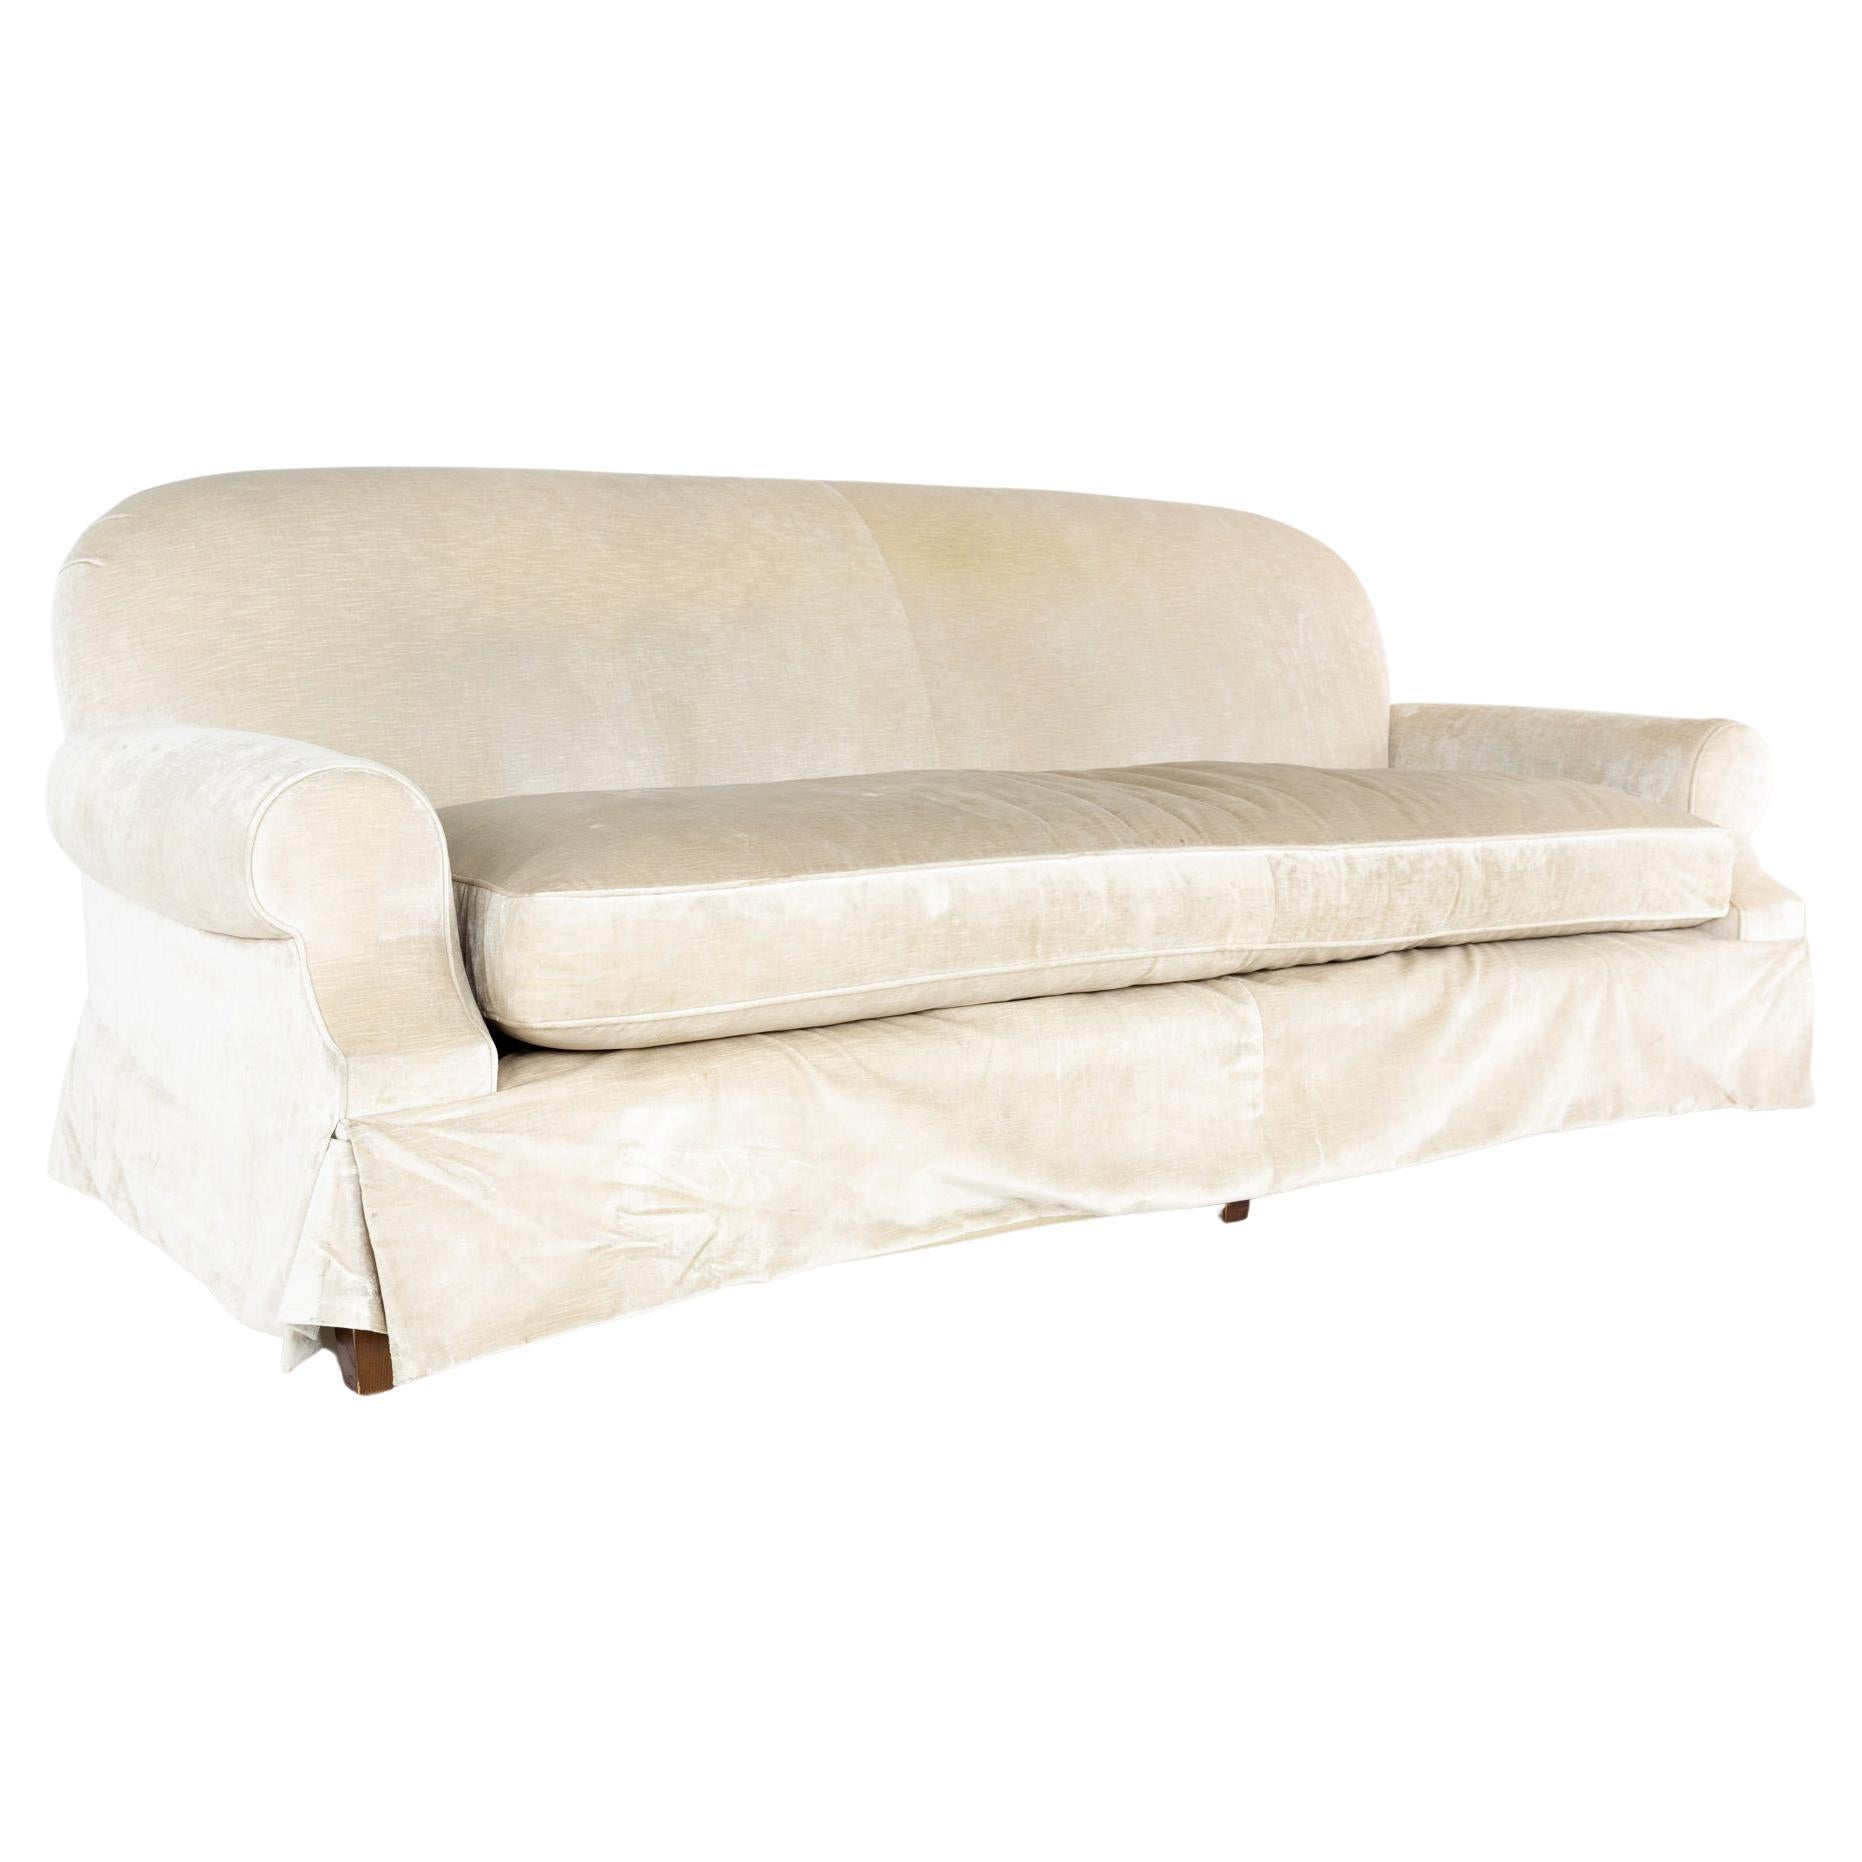 Swaim Contemporary Cream Colored Sofa in Mohair For Sale at 1stDibs